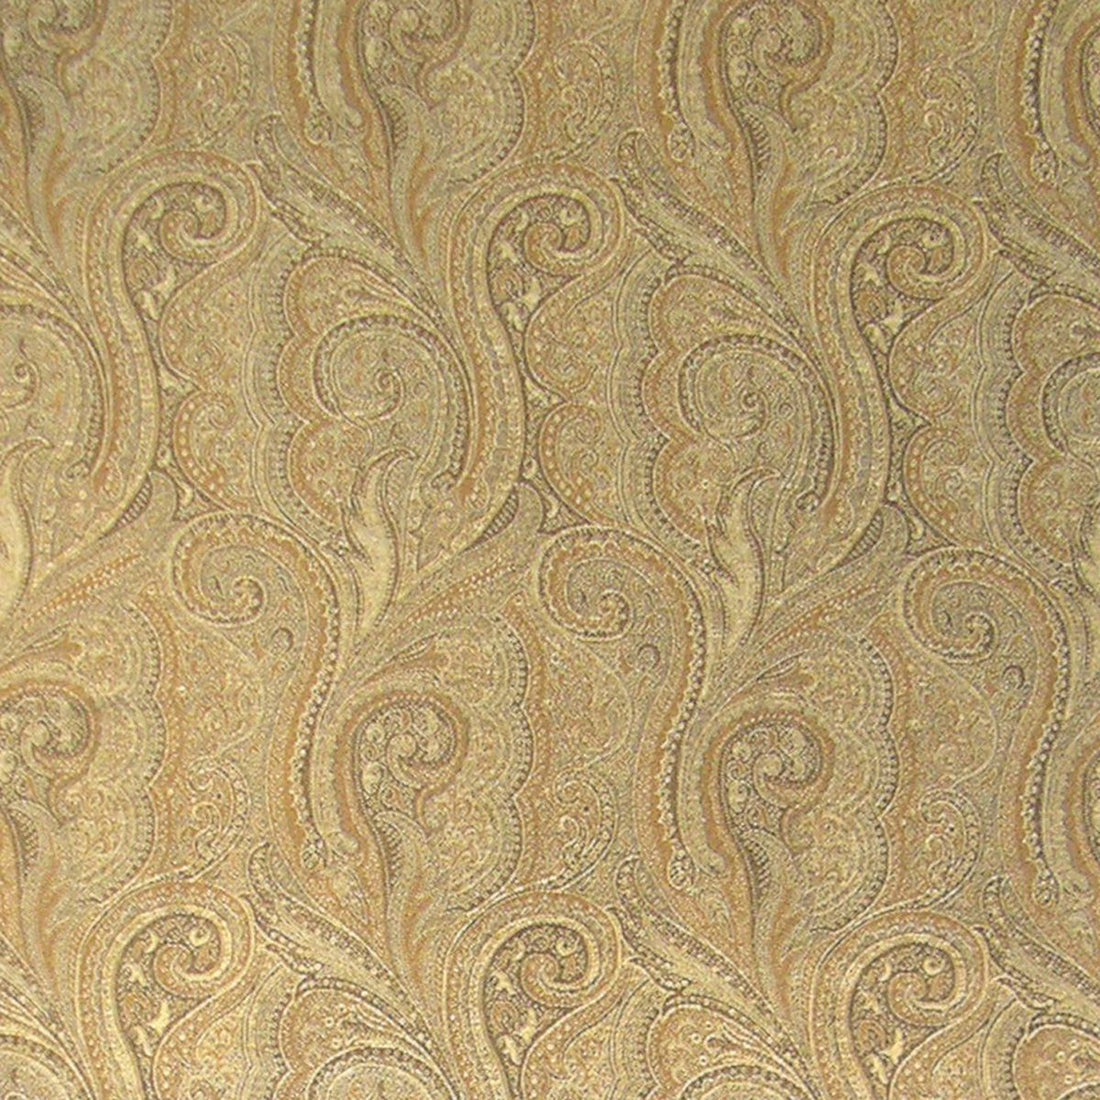 Esfahan fabric in camel color - pattern number FR 00011516 - by Scalamandre in the Old World Weavers collection